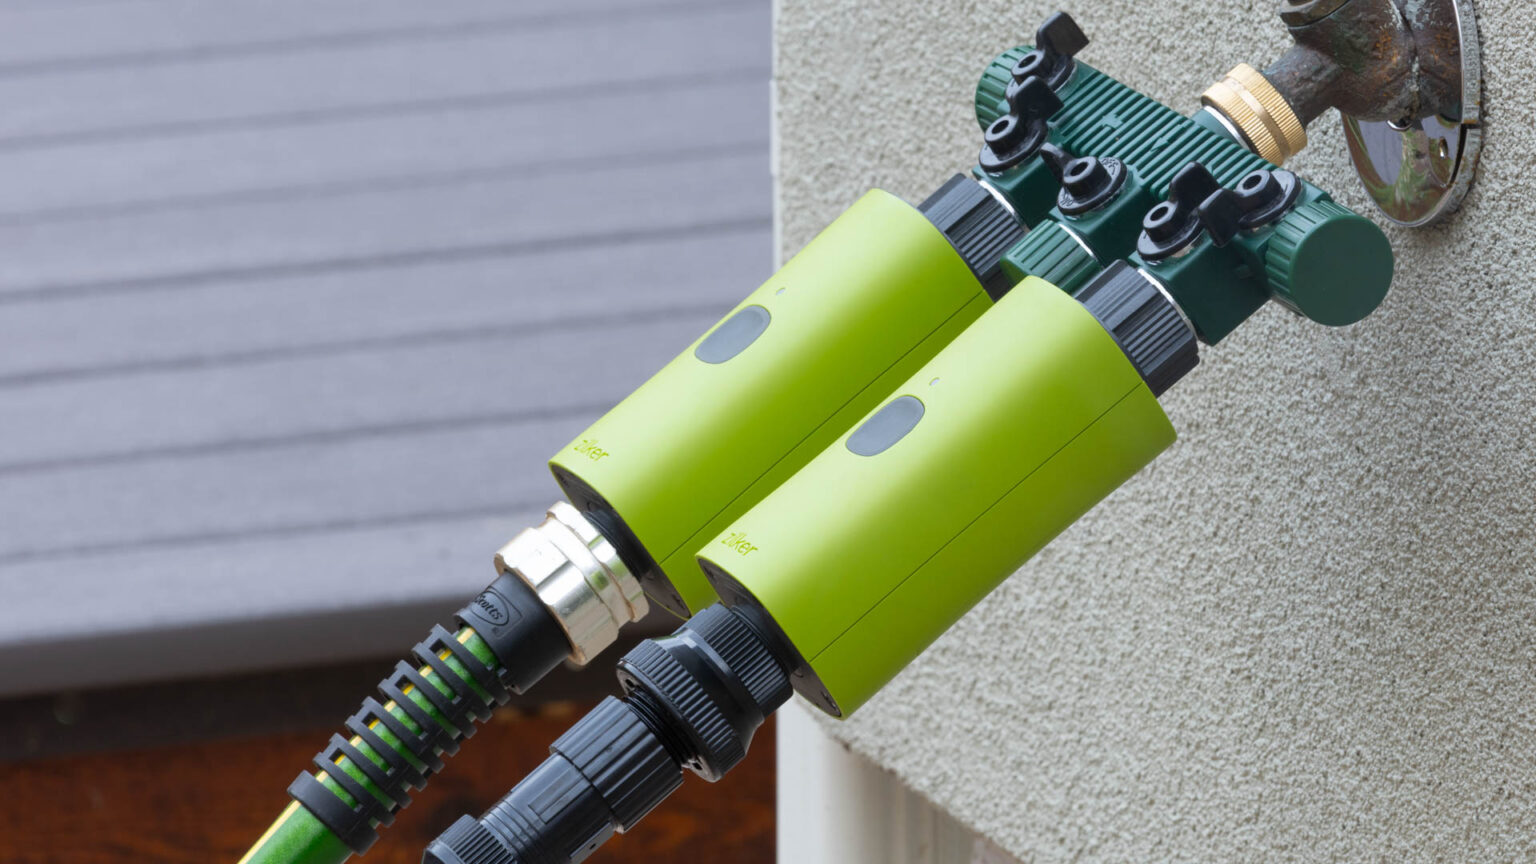 Smart irrigation devices can help save water in the garden. Image: Digitized House.